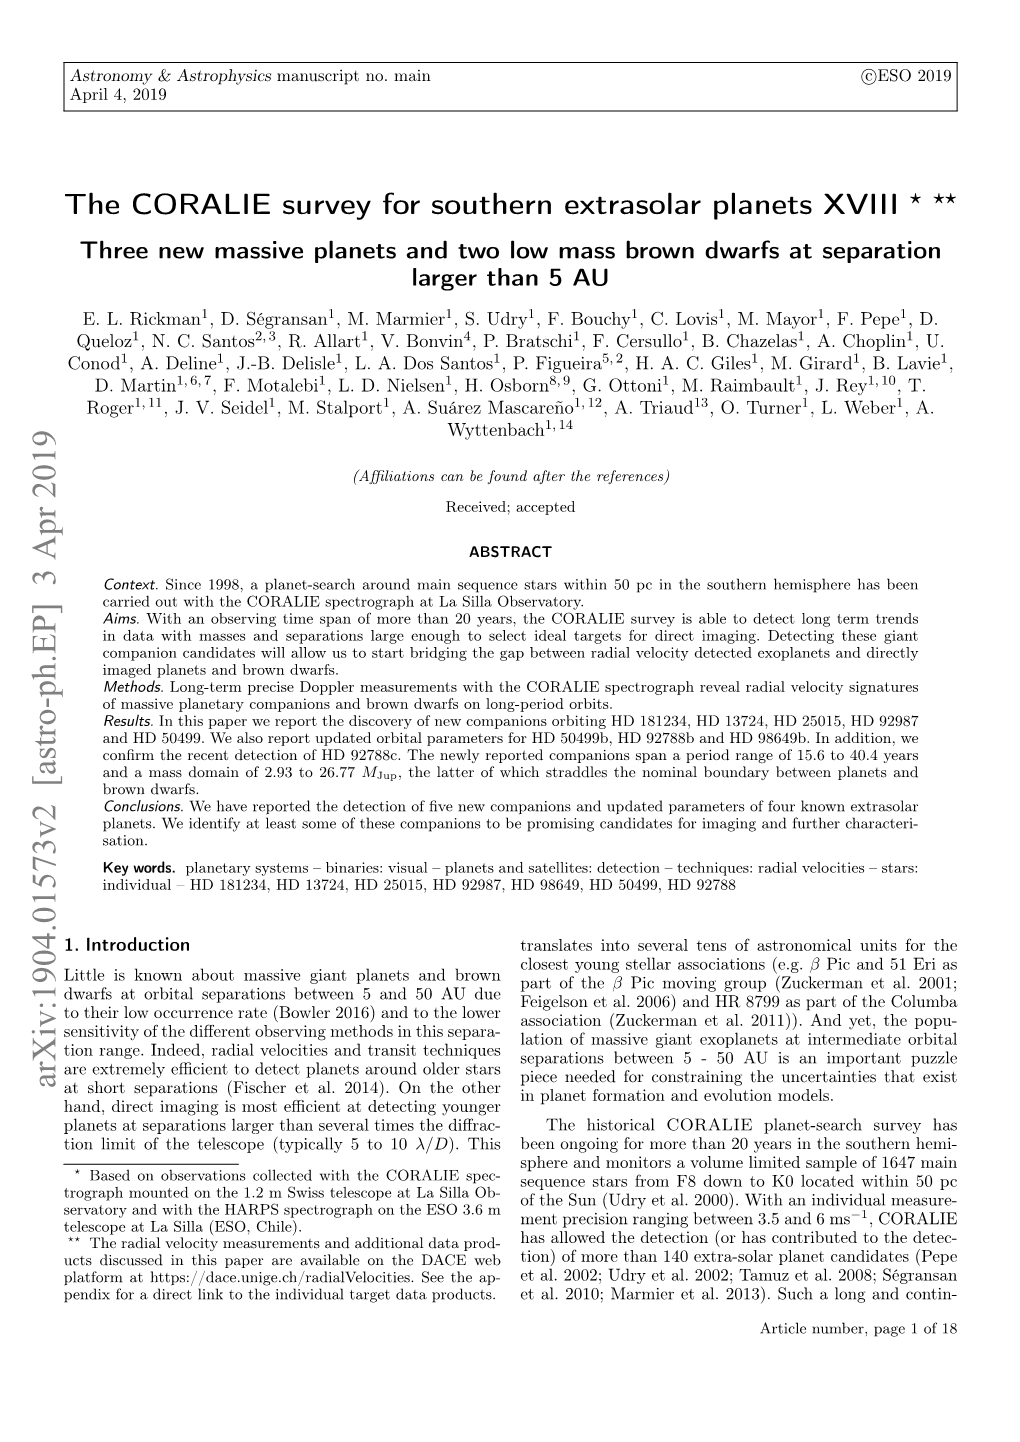 The CORALIE Survey for Southern Extrasolar Planets XVIII. Three New